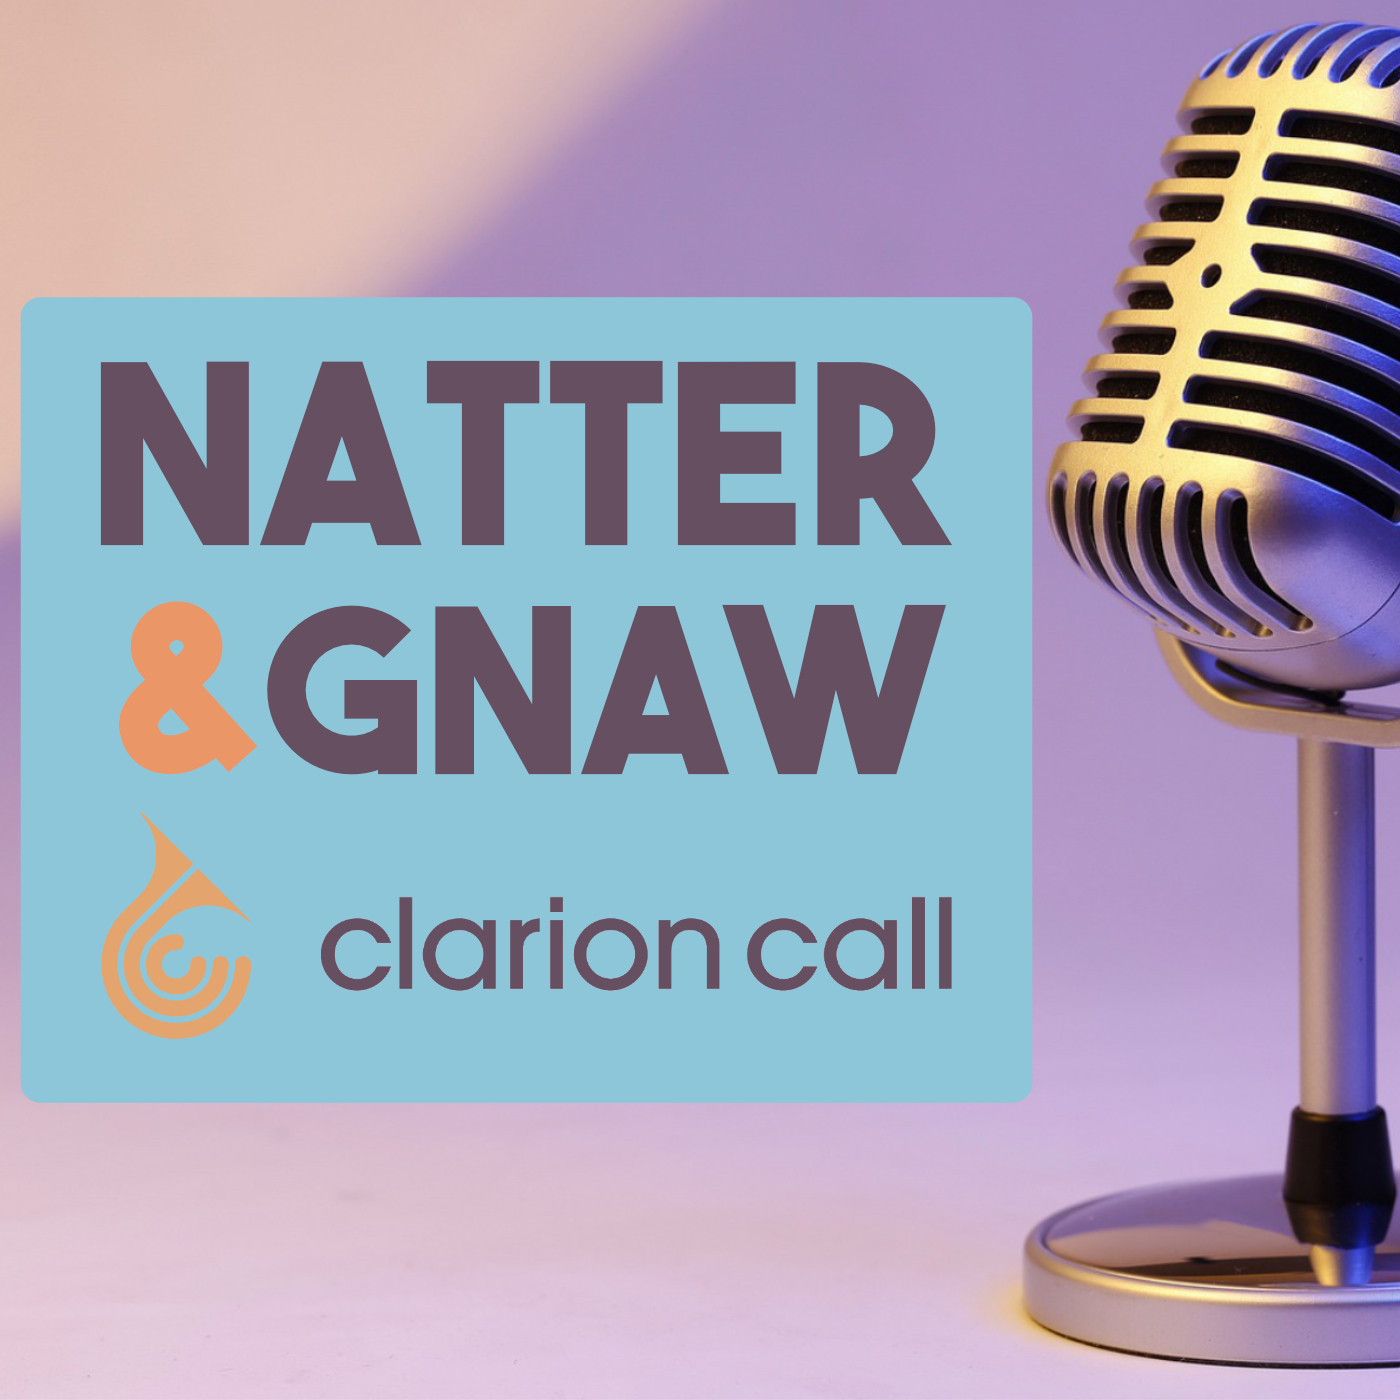 Artwork for Natter & Gnaw by Clarion Call